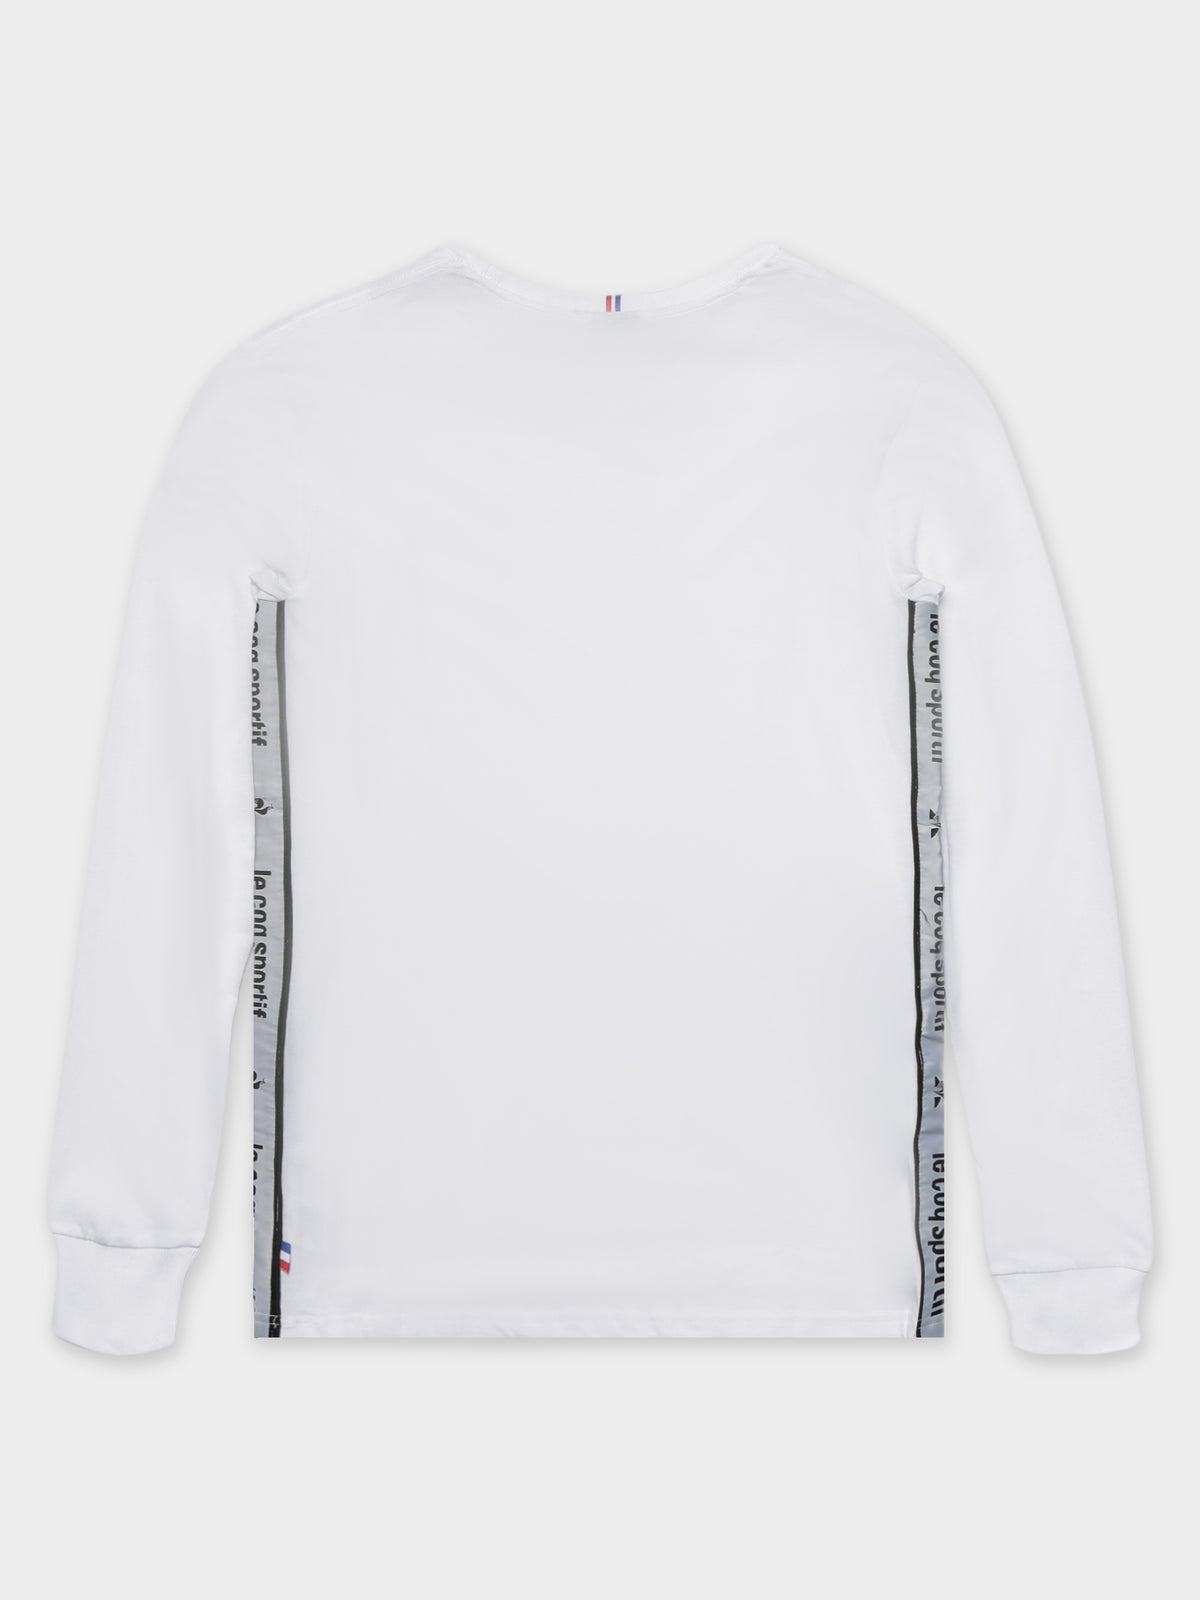 Royale Long Sleeve T-Shirt in White